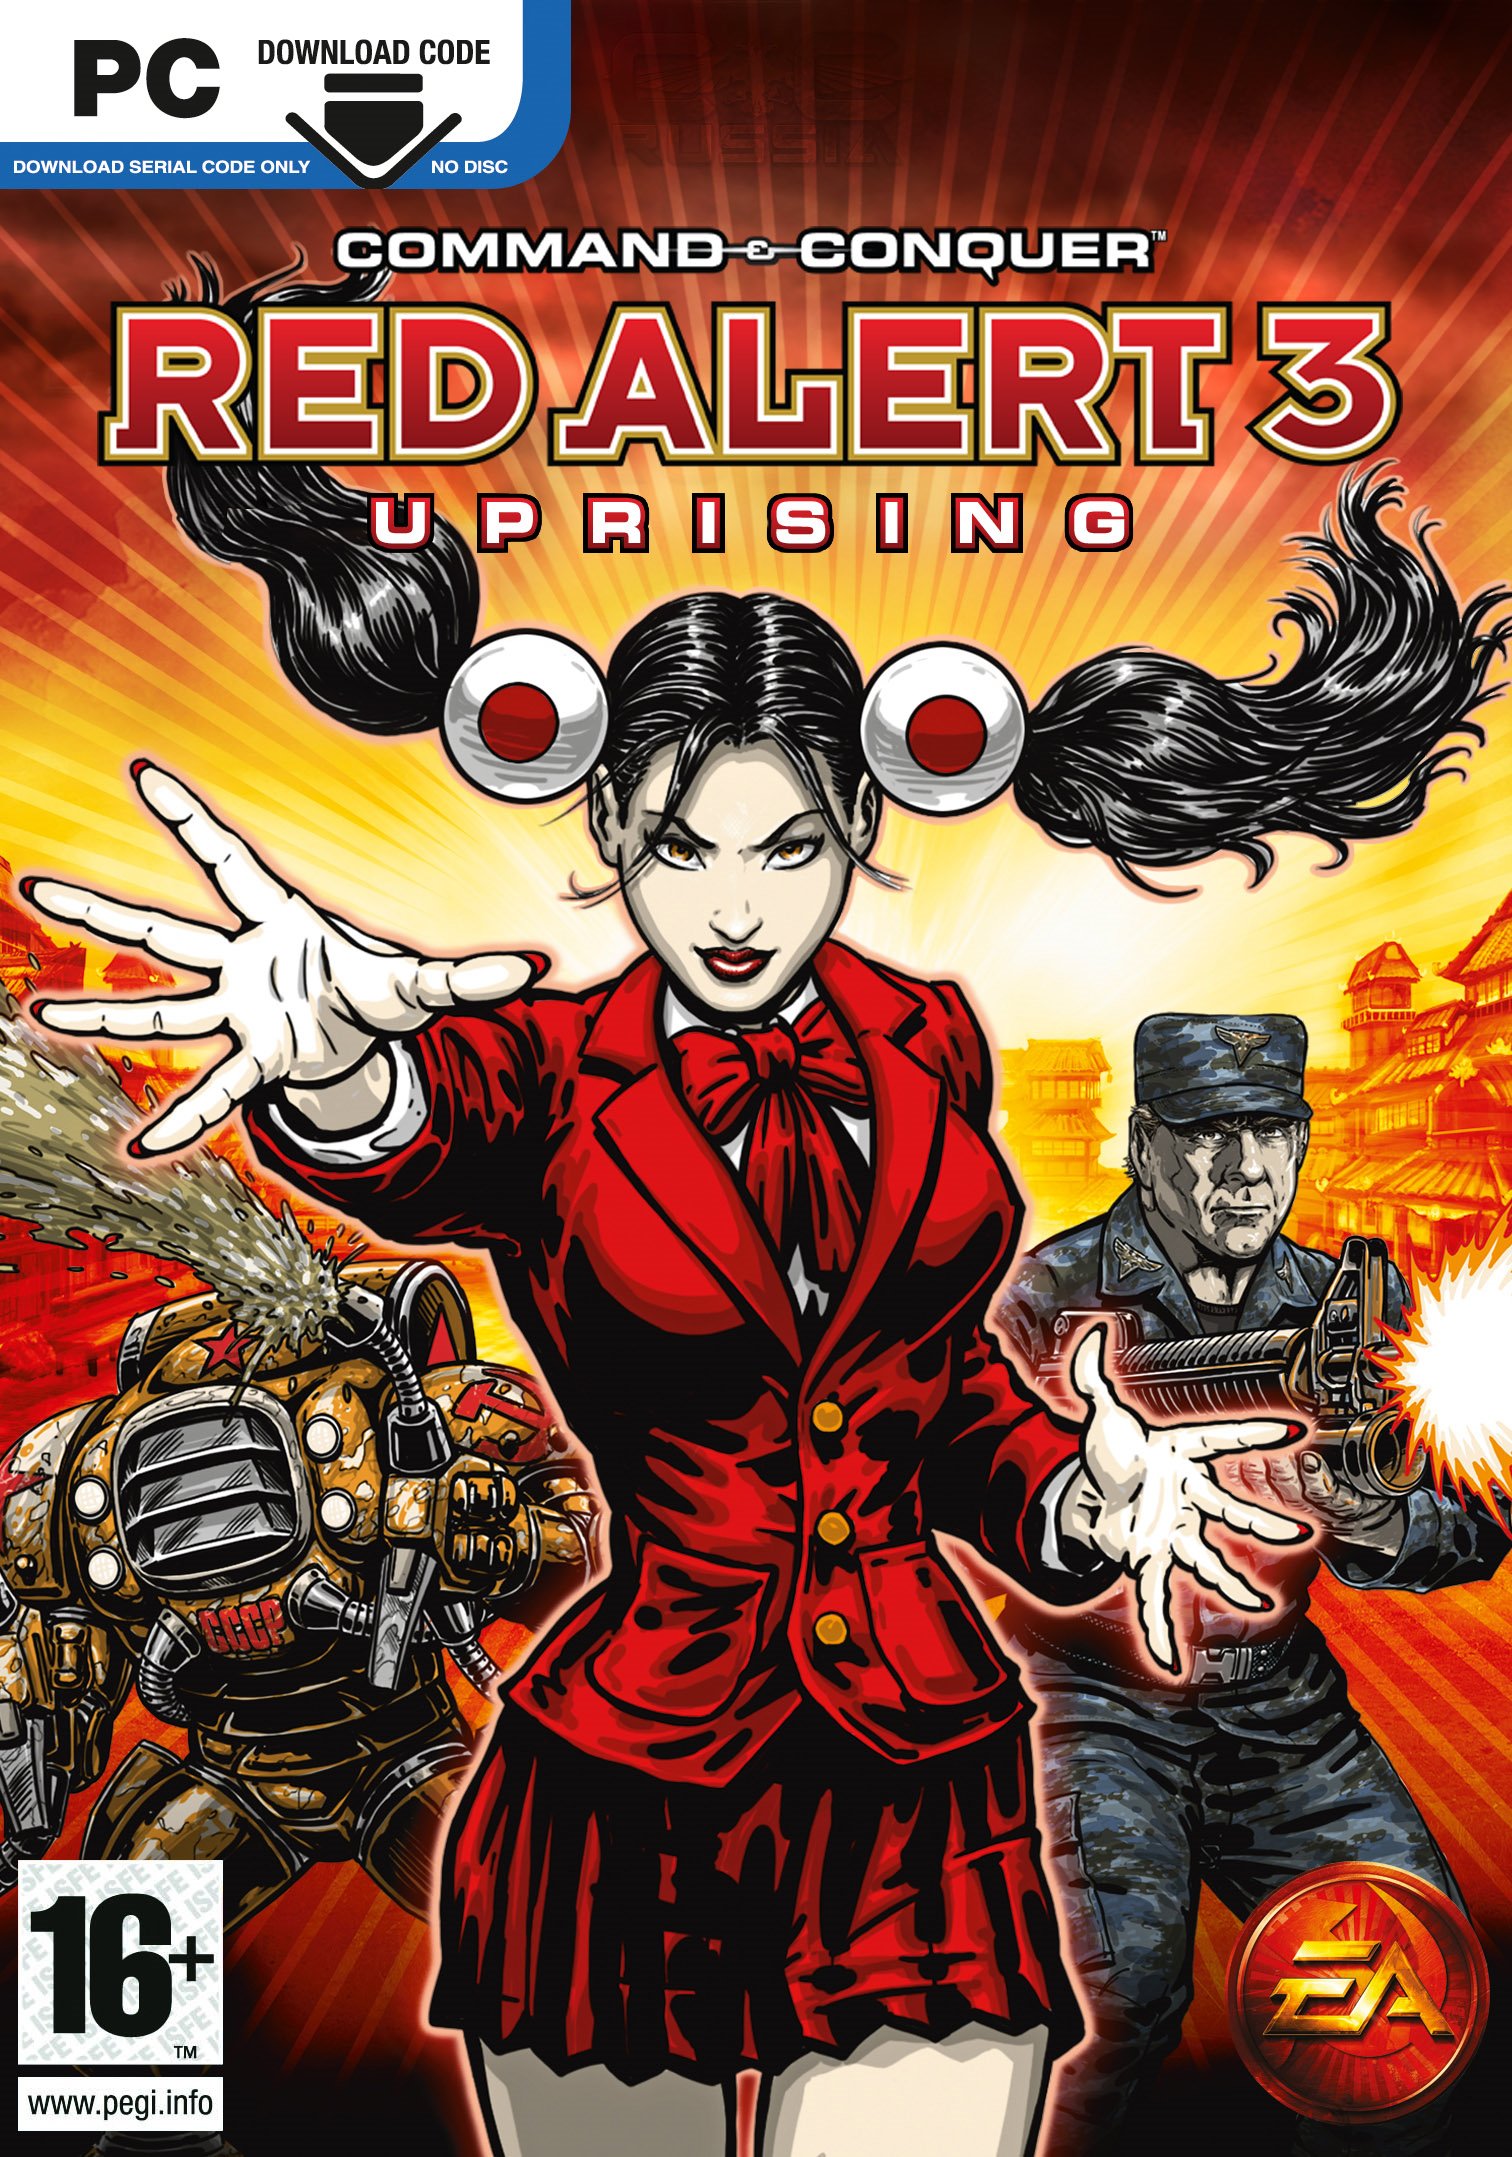 serial code for command and conquer red alert 2